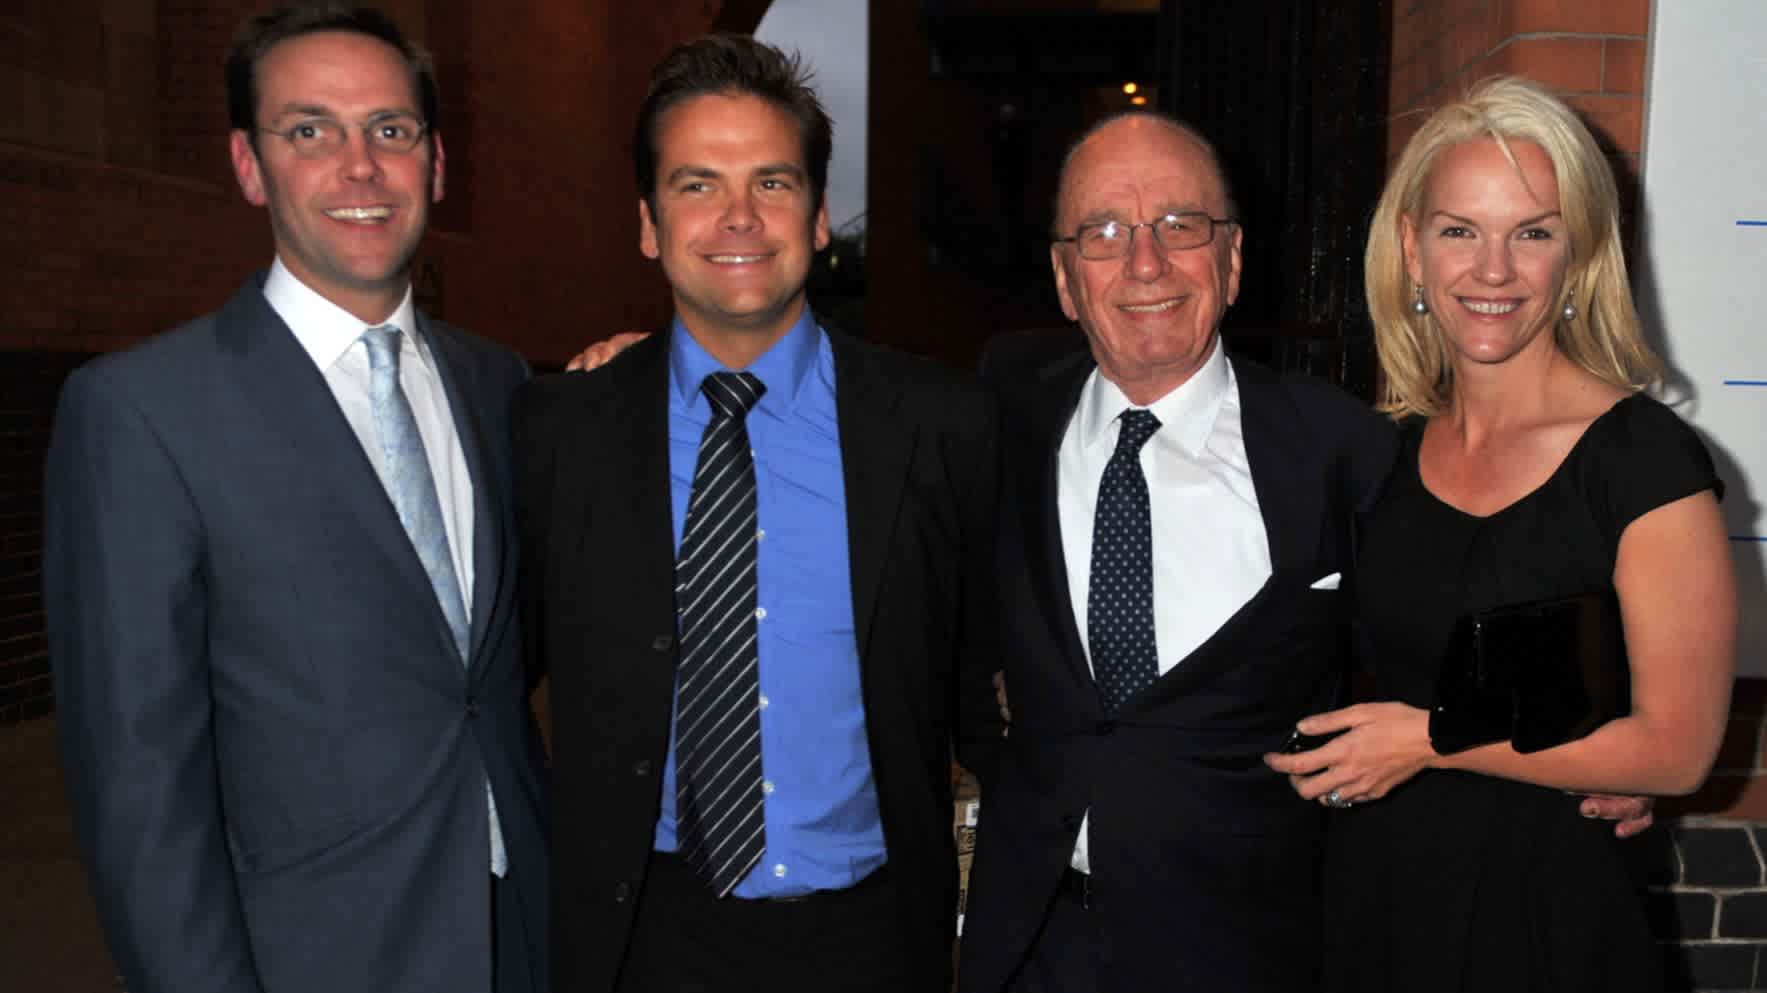 Lachlan’s accession won’t put an end to Murdoch family strife